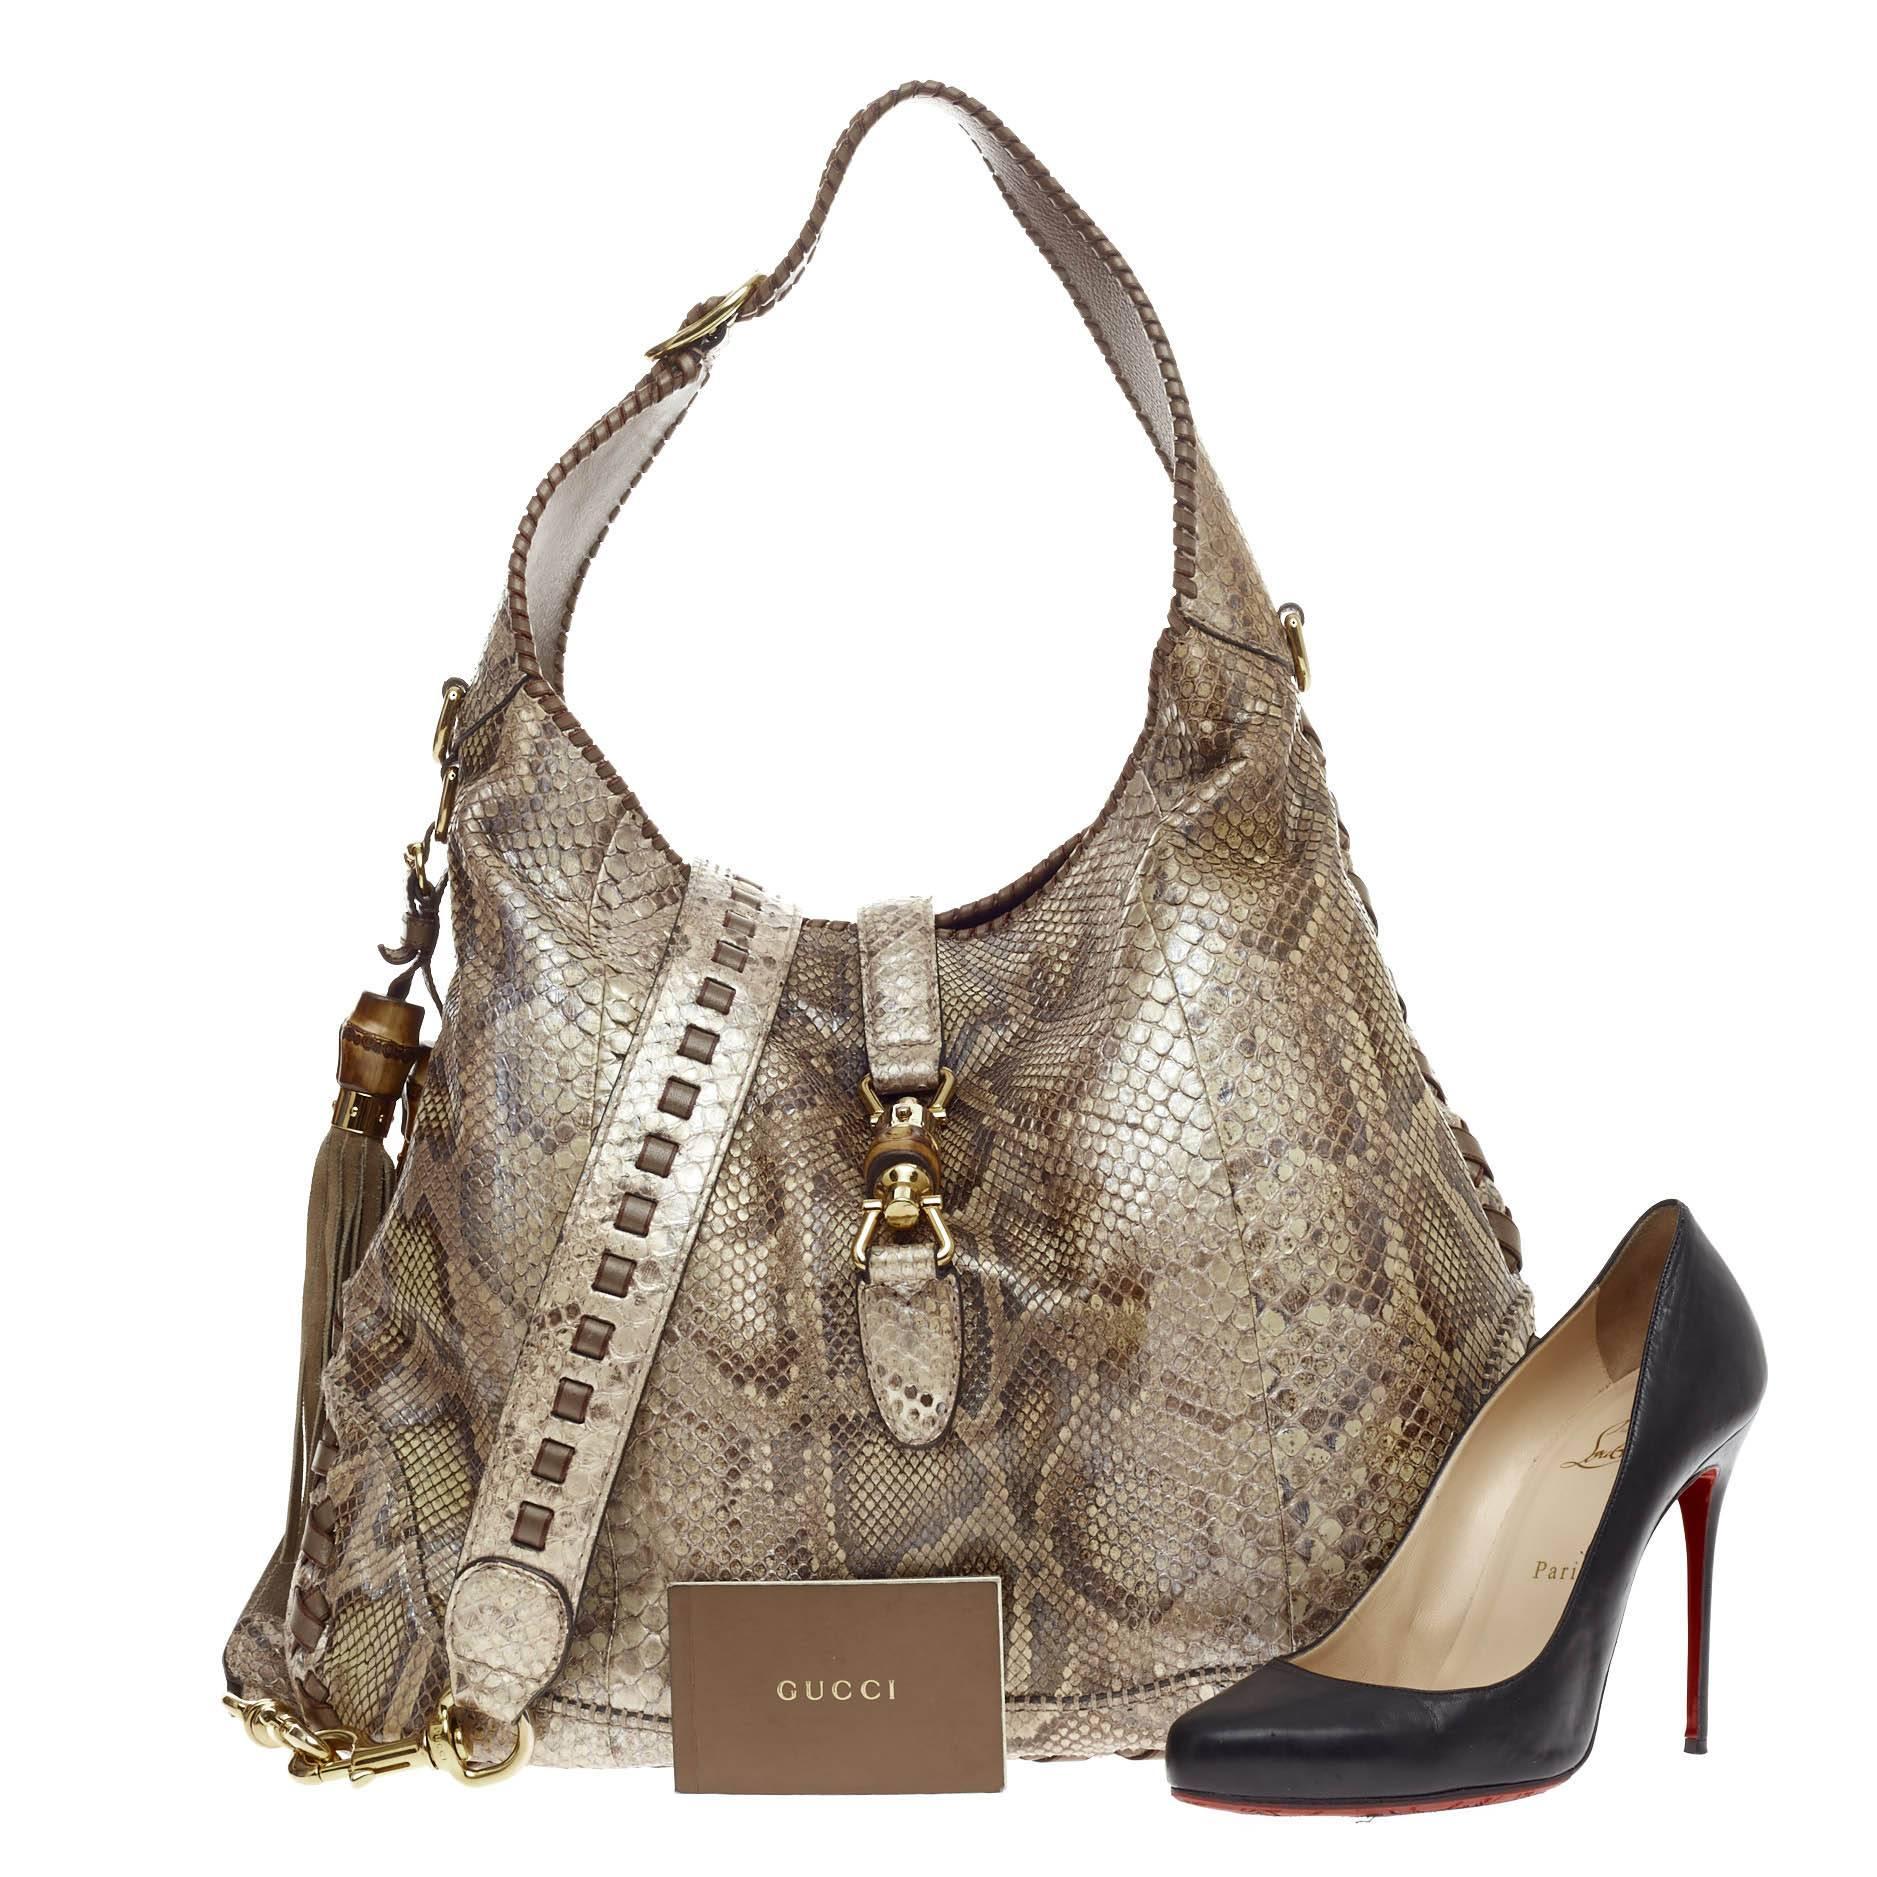 This authentic Gucci New Jackie Python Large is a must-have luxurious everyday hobo fit for the modern woman. Constructed from genuine multicolor beige and brown python skin, this bag features side fringe tassels with bamboo accents, cross leather